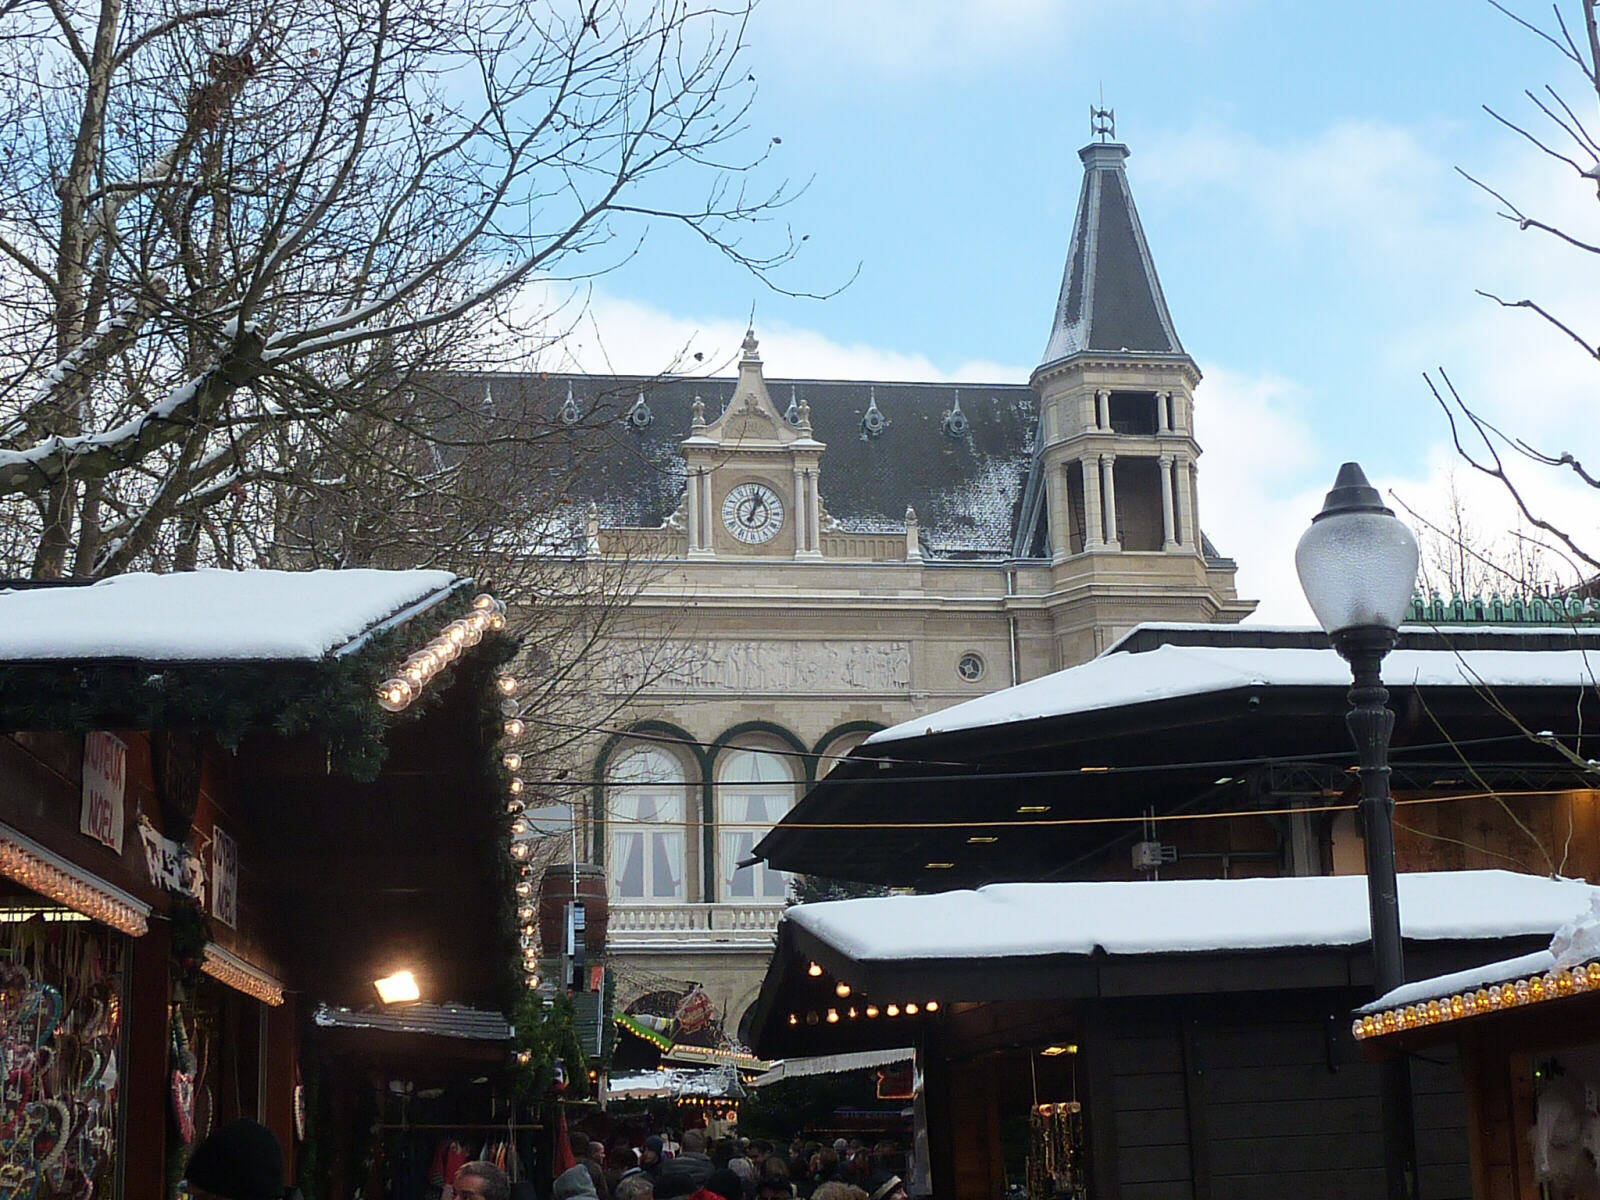 A Christmas market in Luxembourg